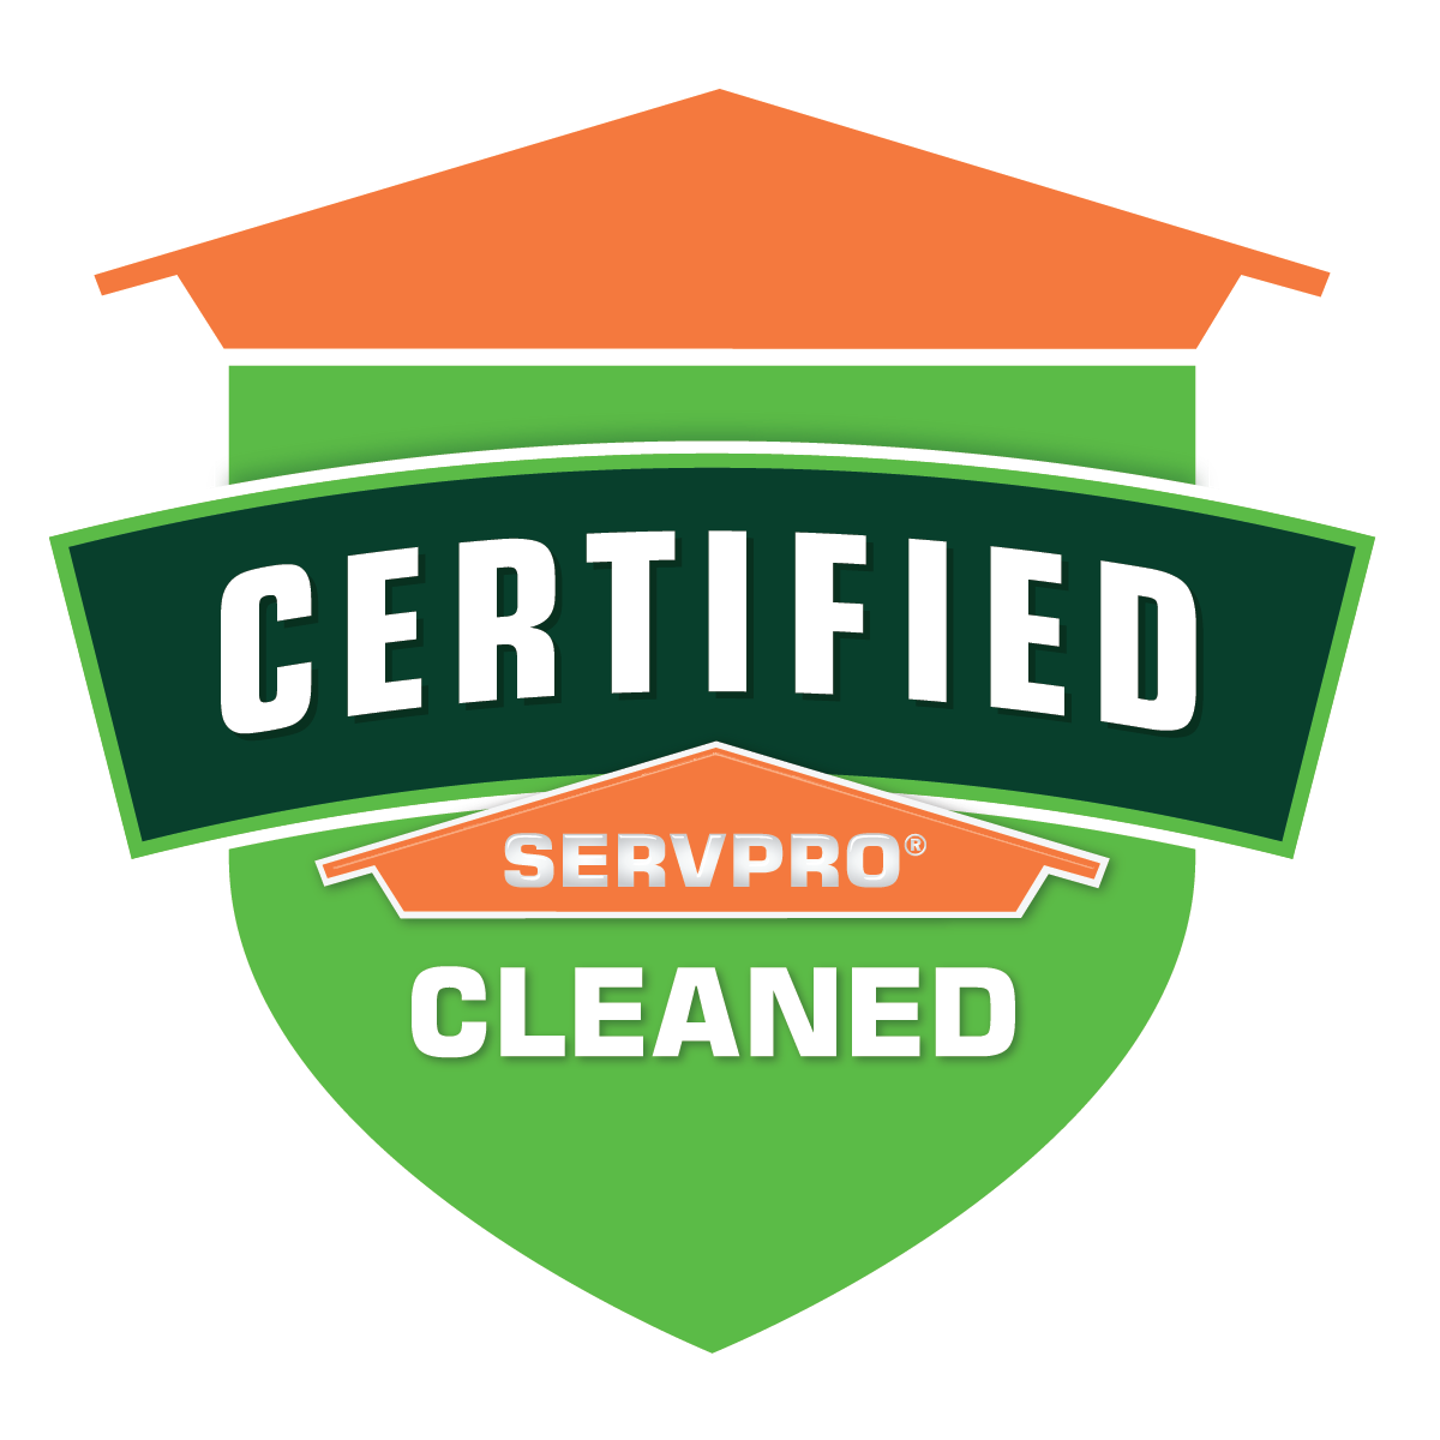 SERVPRO Certified icon